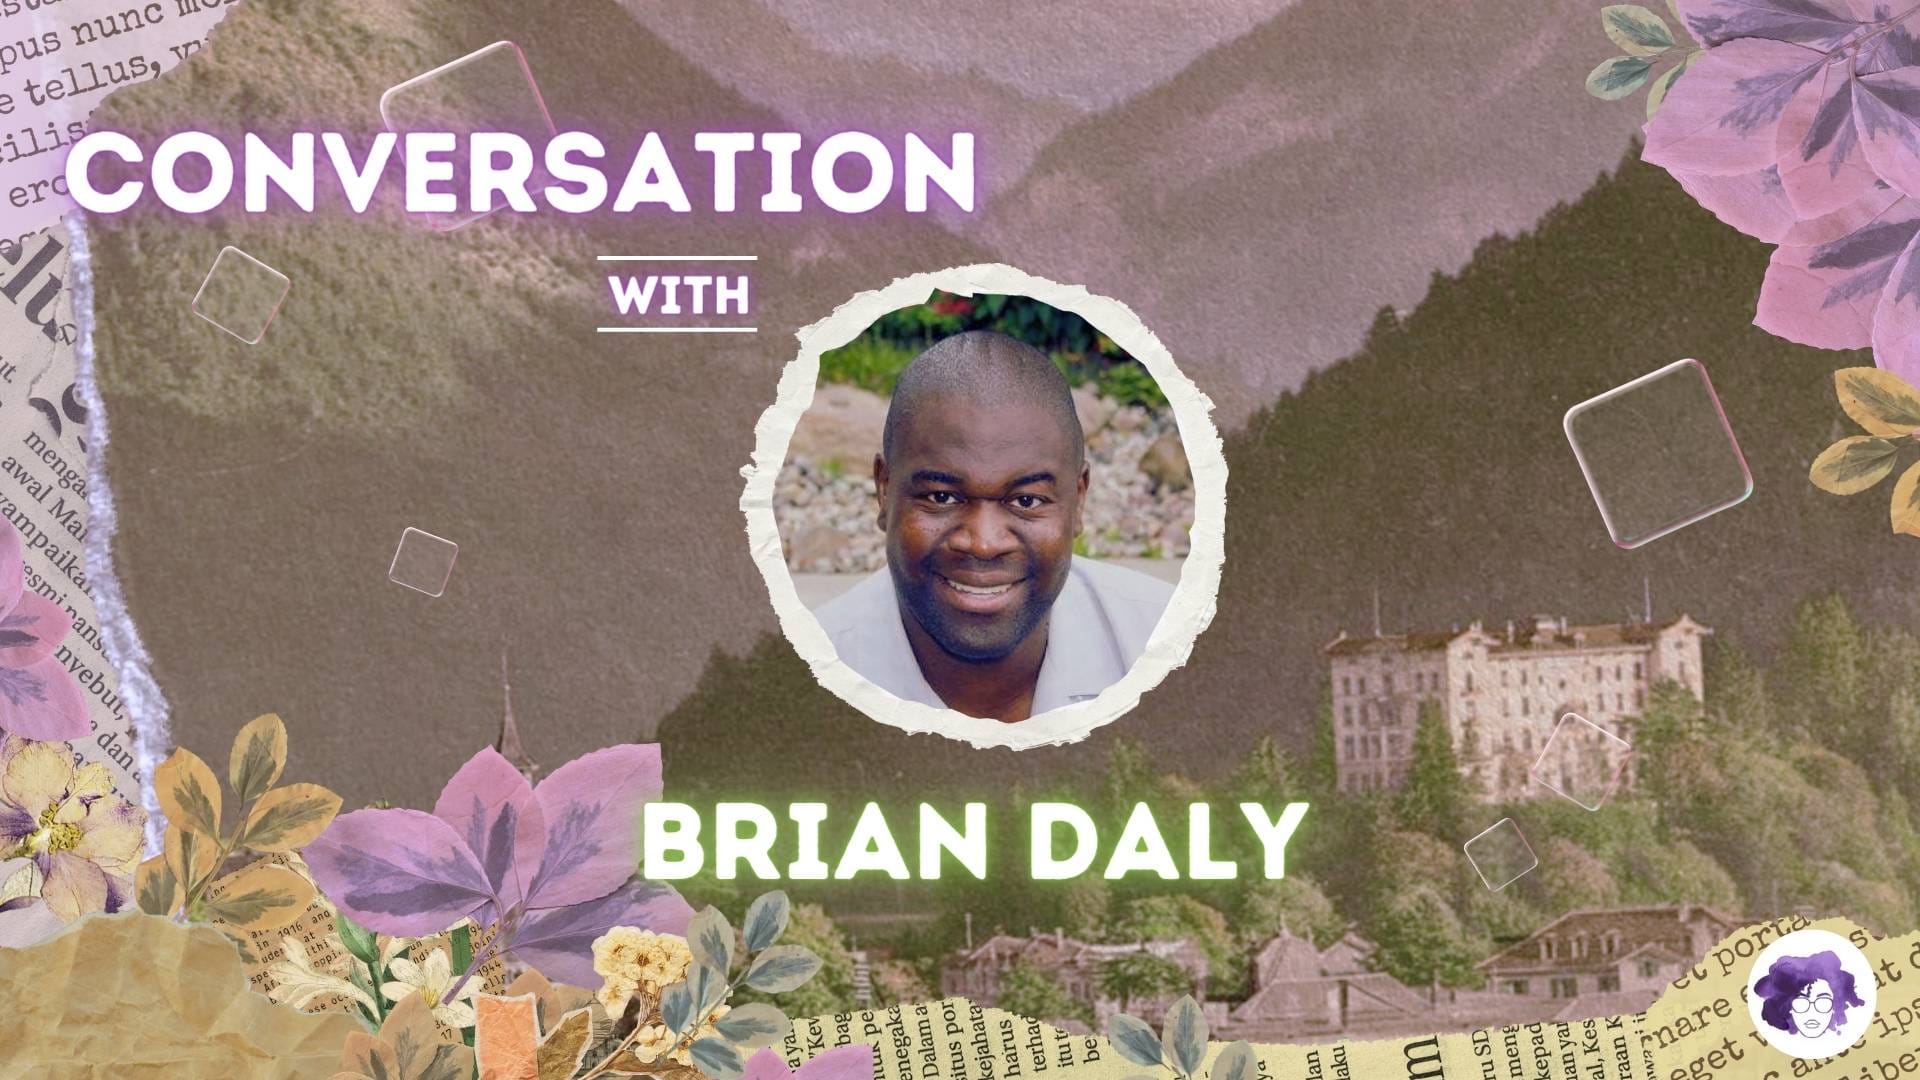 "Conversation with Brian Daly" appears next to a headshot of Brian Daly.